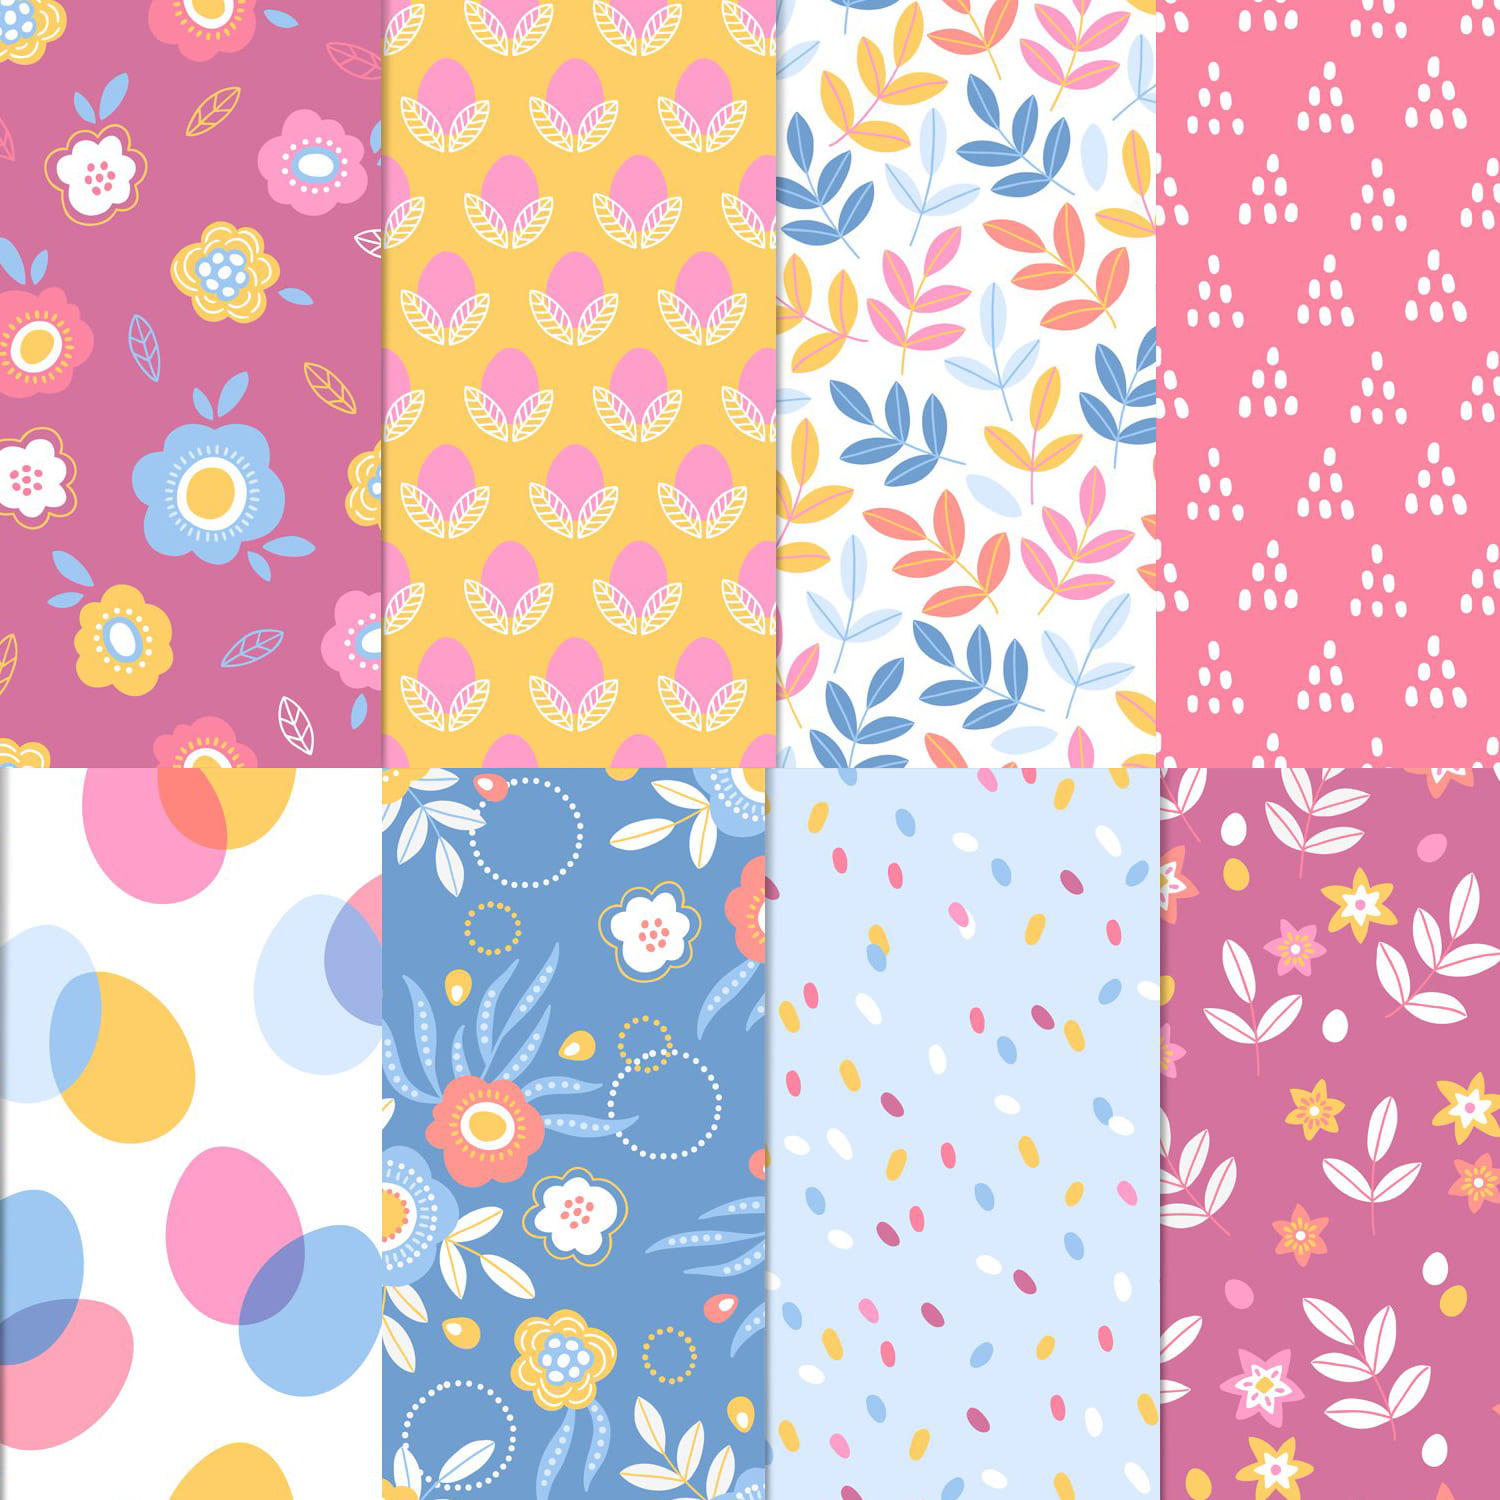 12 Easter Seamless Patterns cover.